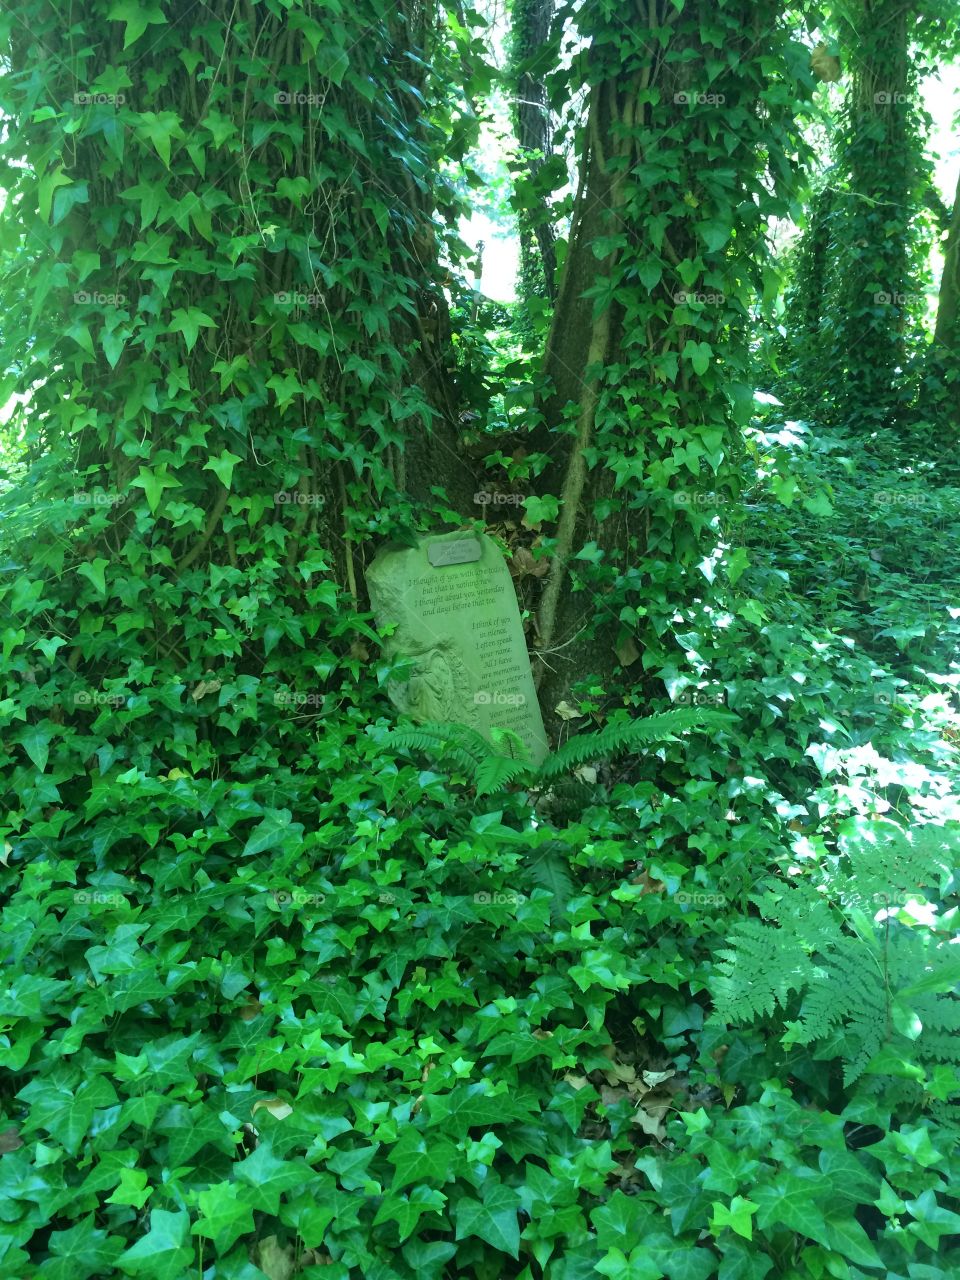 Drowning in Ivy. A memorial stone slowly being taken over by ivy